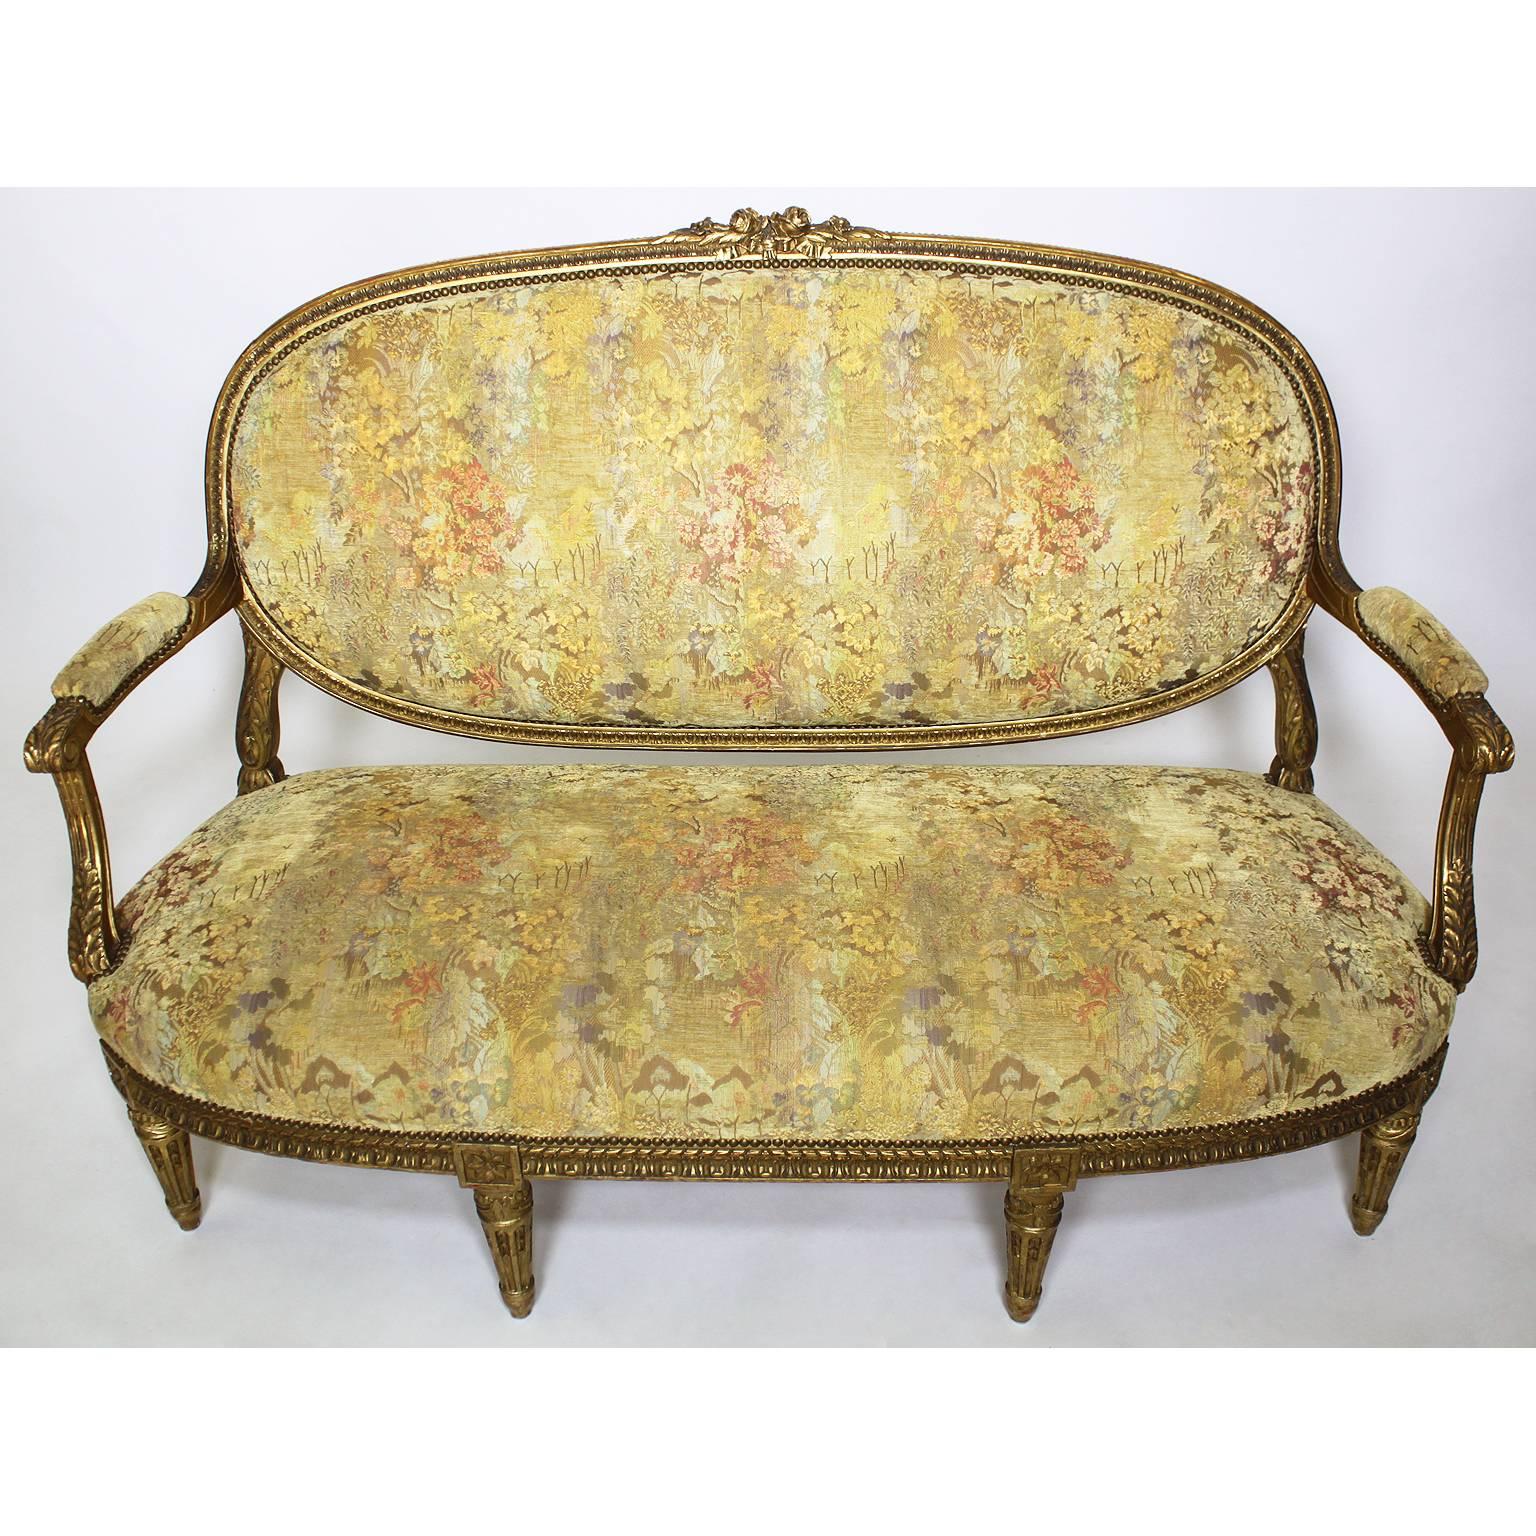 Fabric Fine French 19th Century Louis XVI Style Giltwood Carved Five-Piece Salon Suite